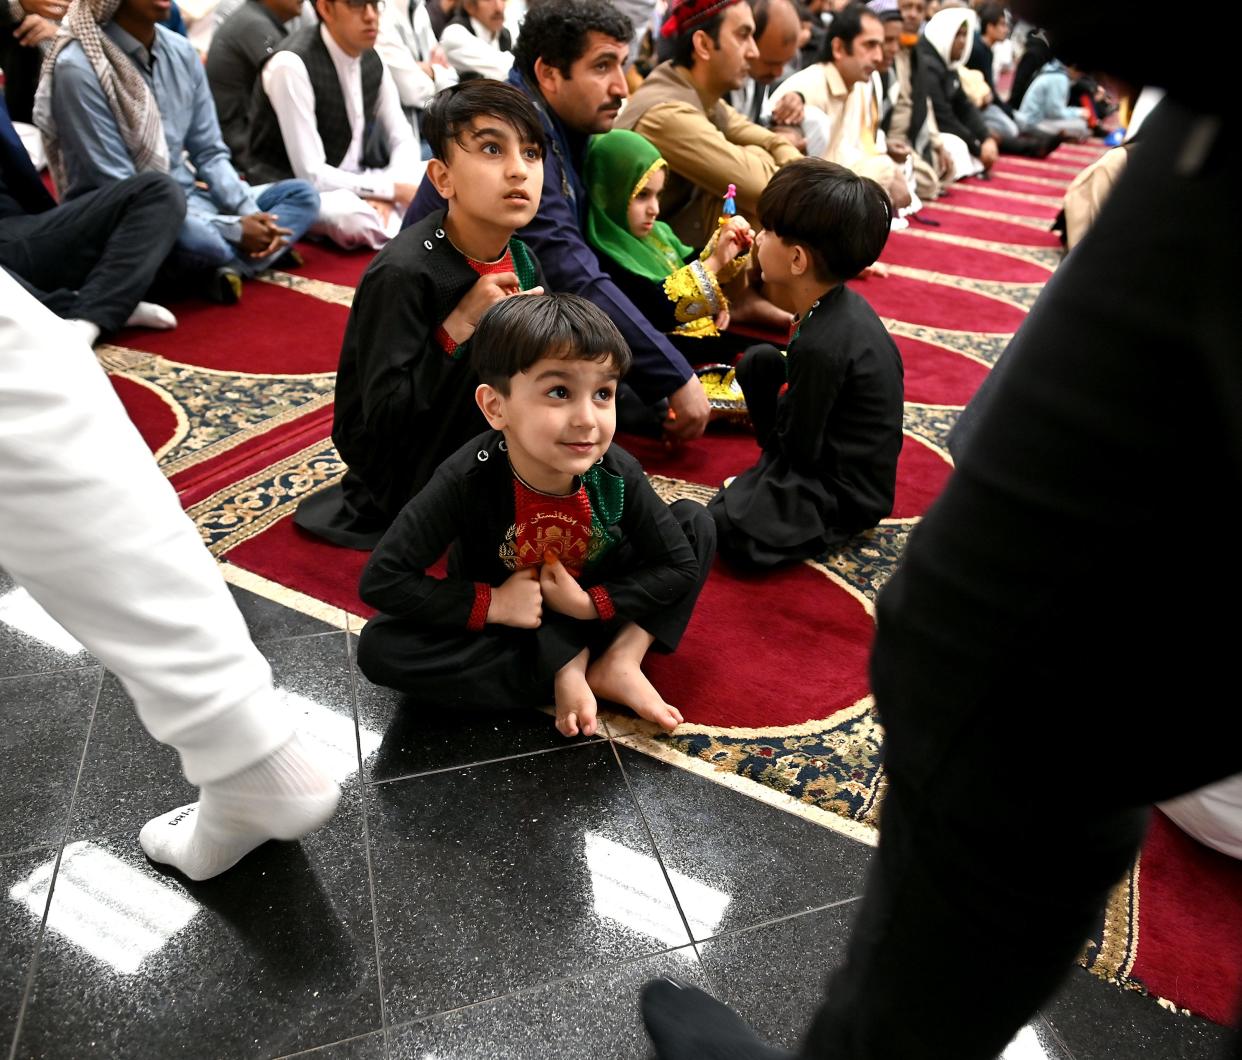 Three-year-old Zahidulla, front, and Favhadulla, 9, both of whom recently emigrated with their families to Worcester from Afghanistan, watch as fellow Muslims enter for a special prayer to start the Eid al-Fitr celebration at the Worcester Islamic Center on Friday.